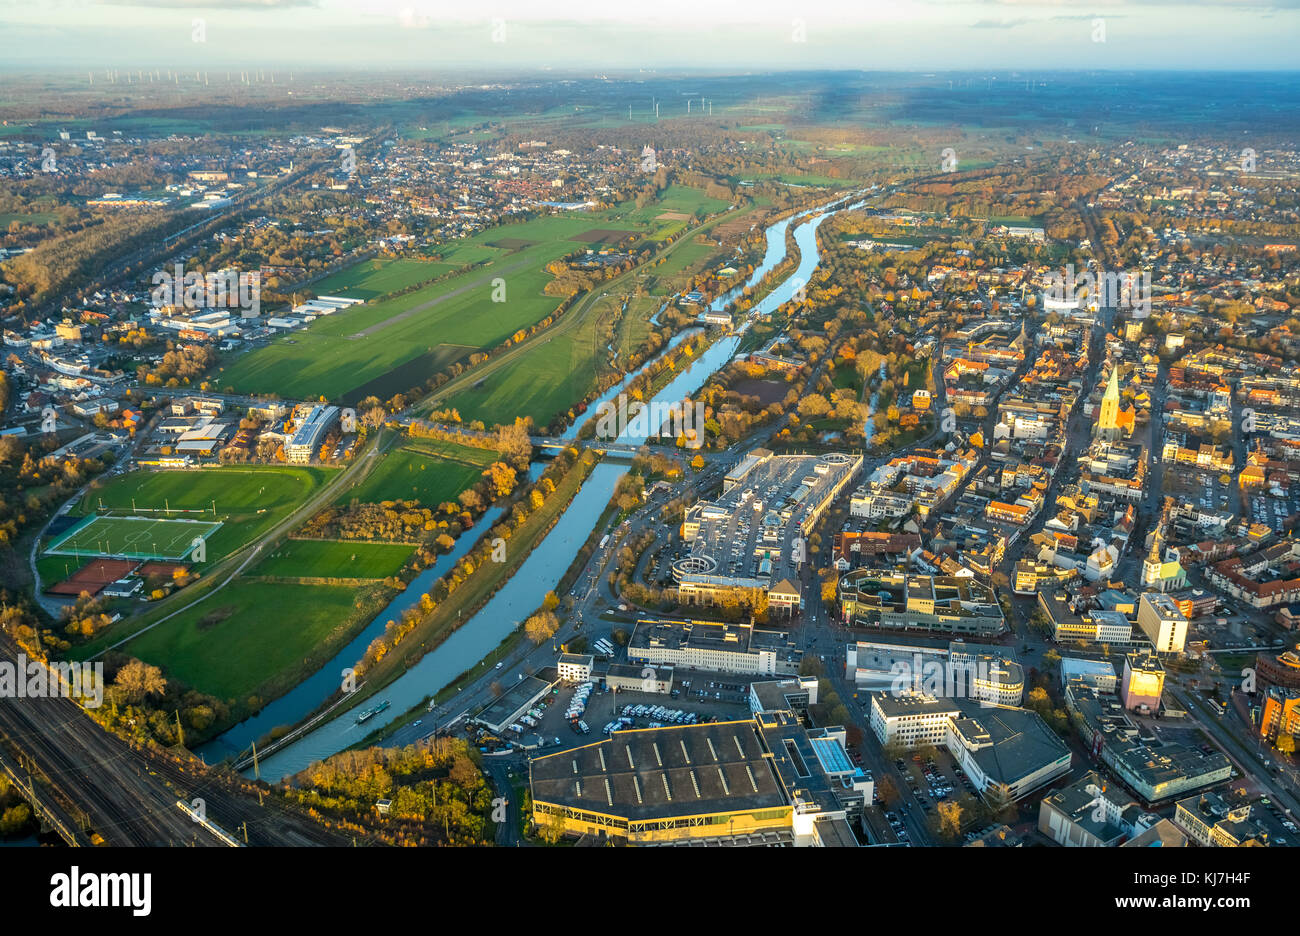 Overview of Hamm, Datteln-Hamm canal, project channel edge between the airport Hamm Lippewiesen and downtown Hamm, river Lippe, sports field at the hi Stock Photo